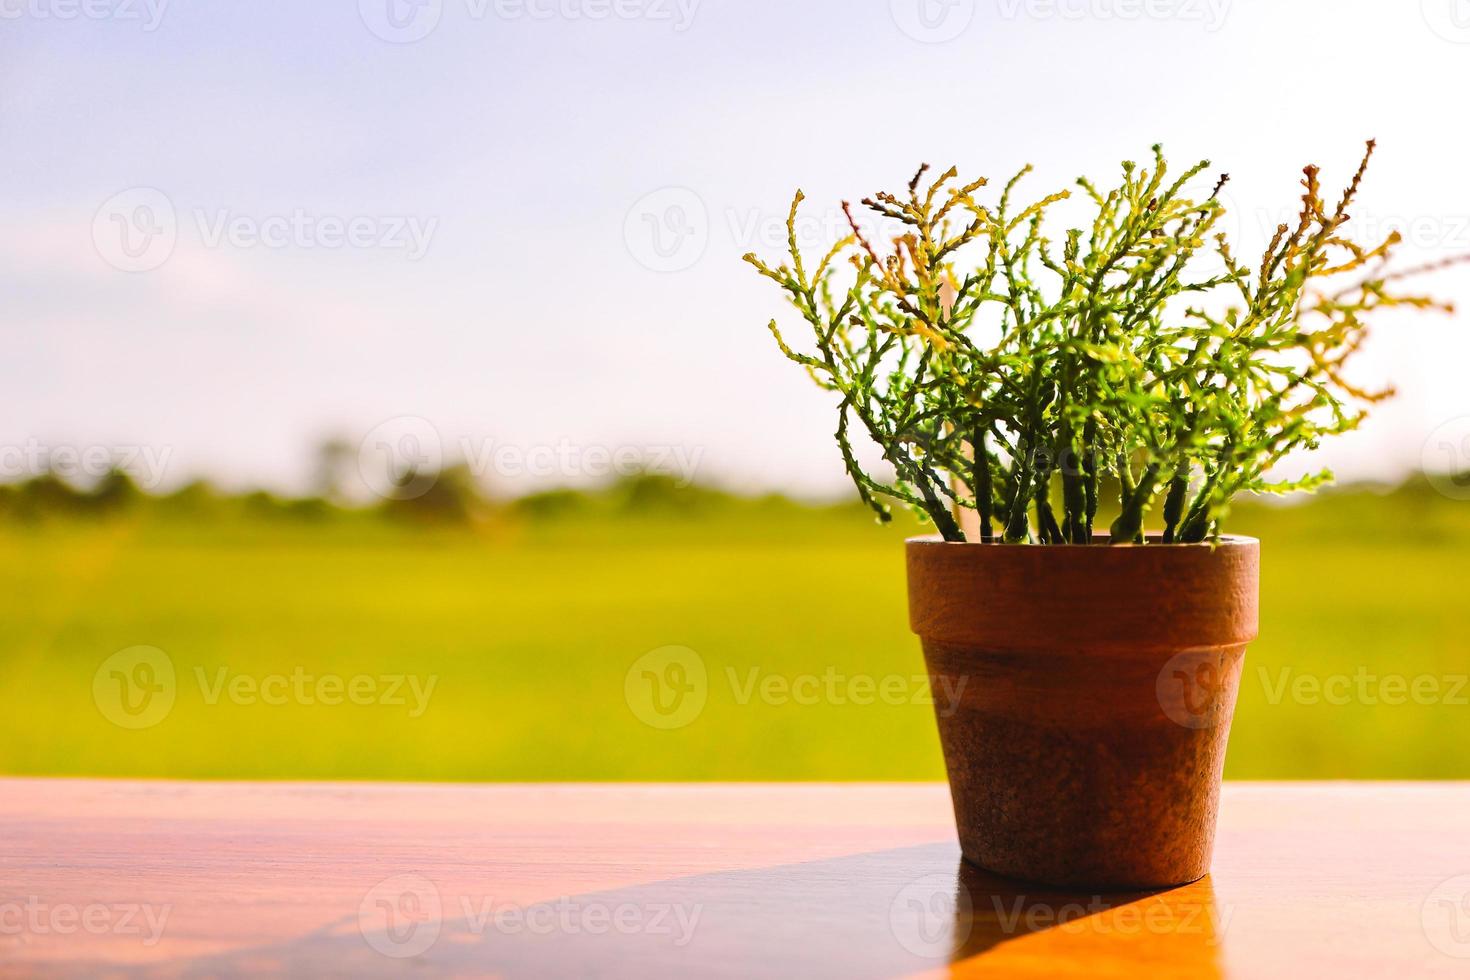 Potted plants placed on wooden floor with blurred background of spring meadow. Blurred focus. photo